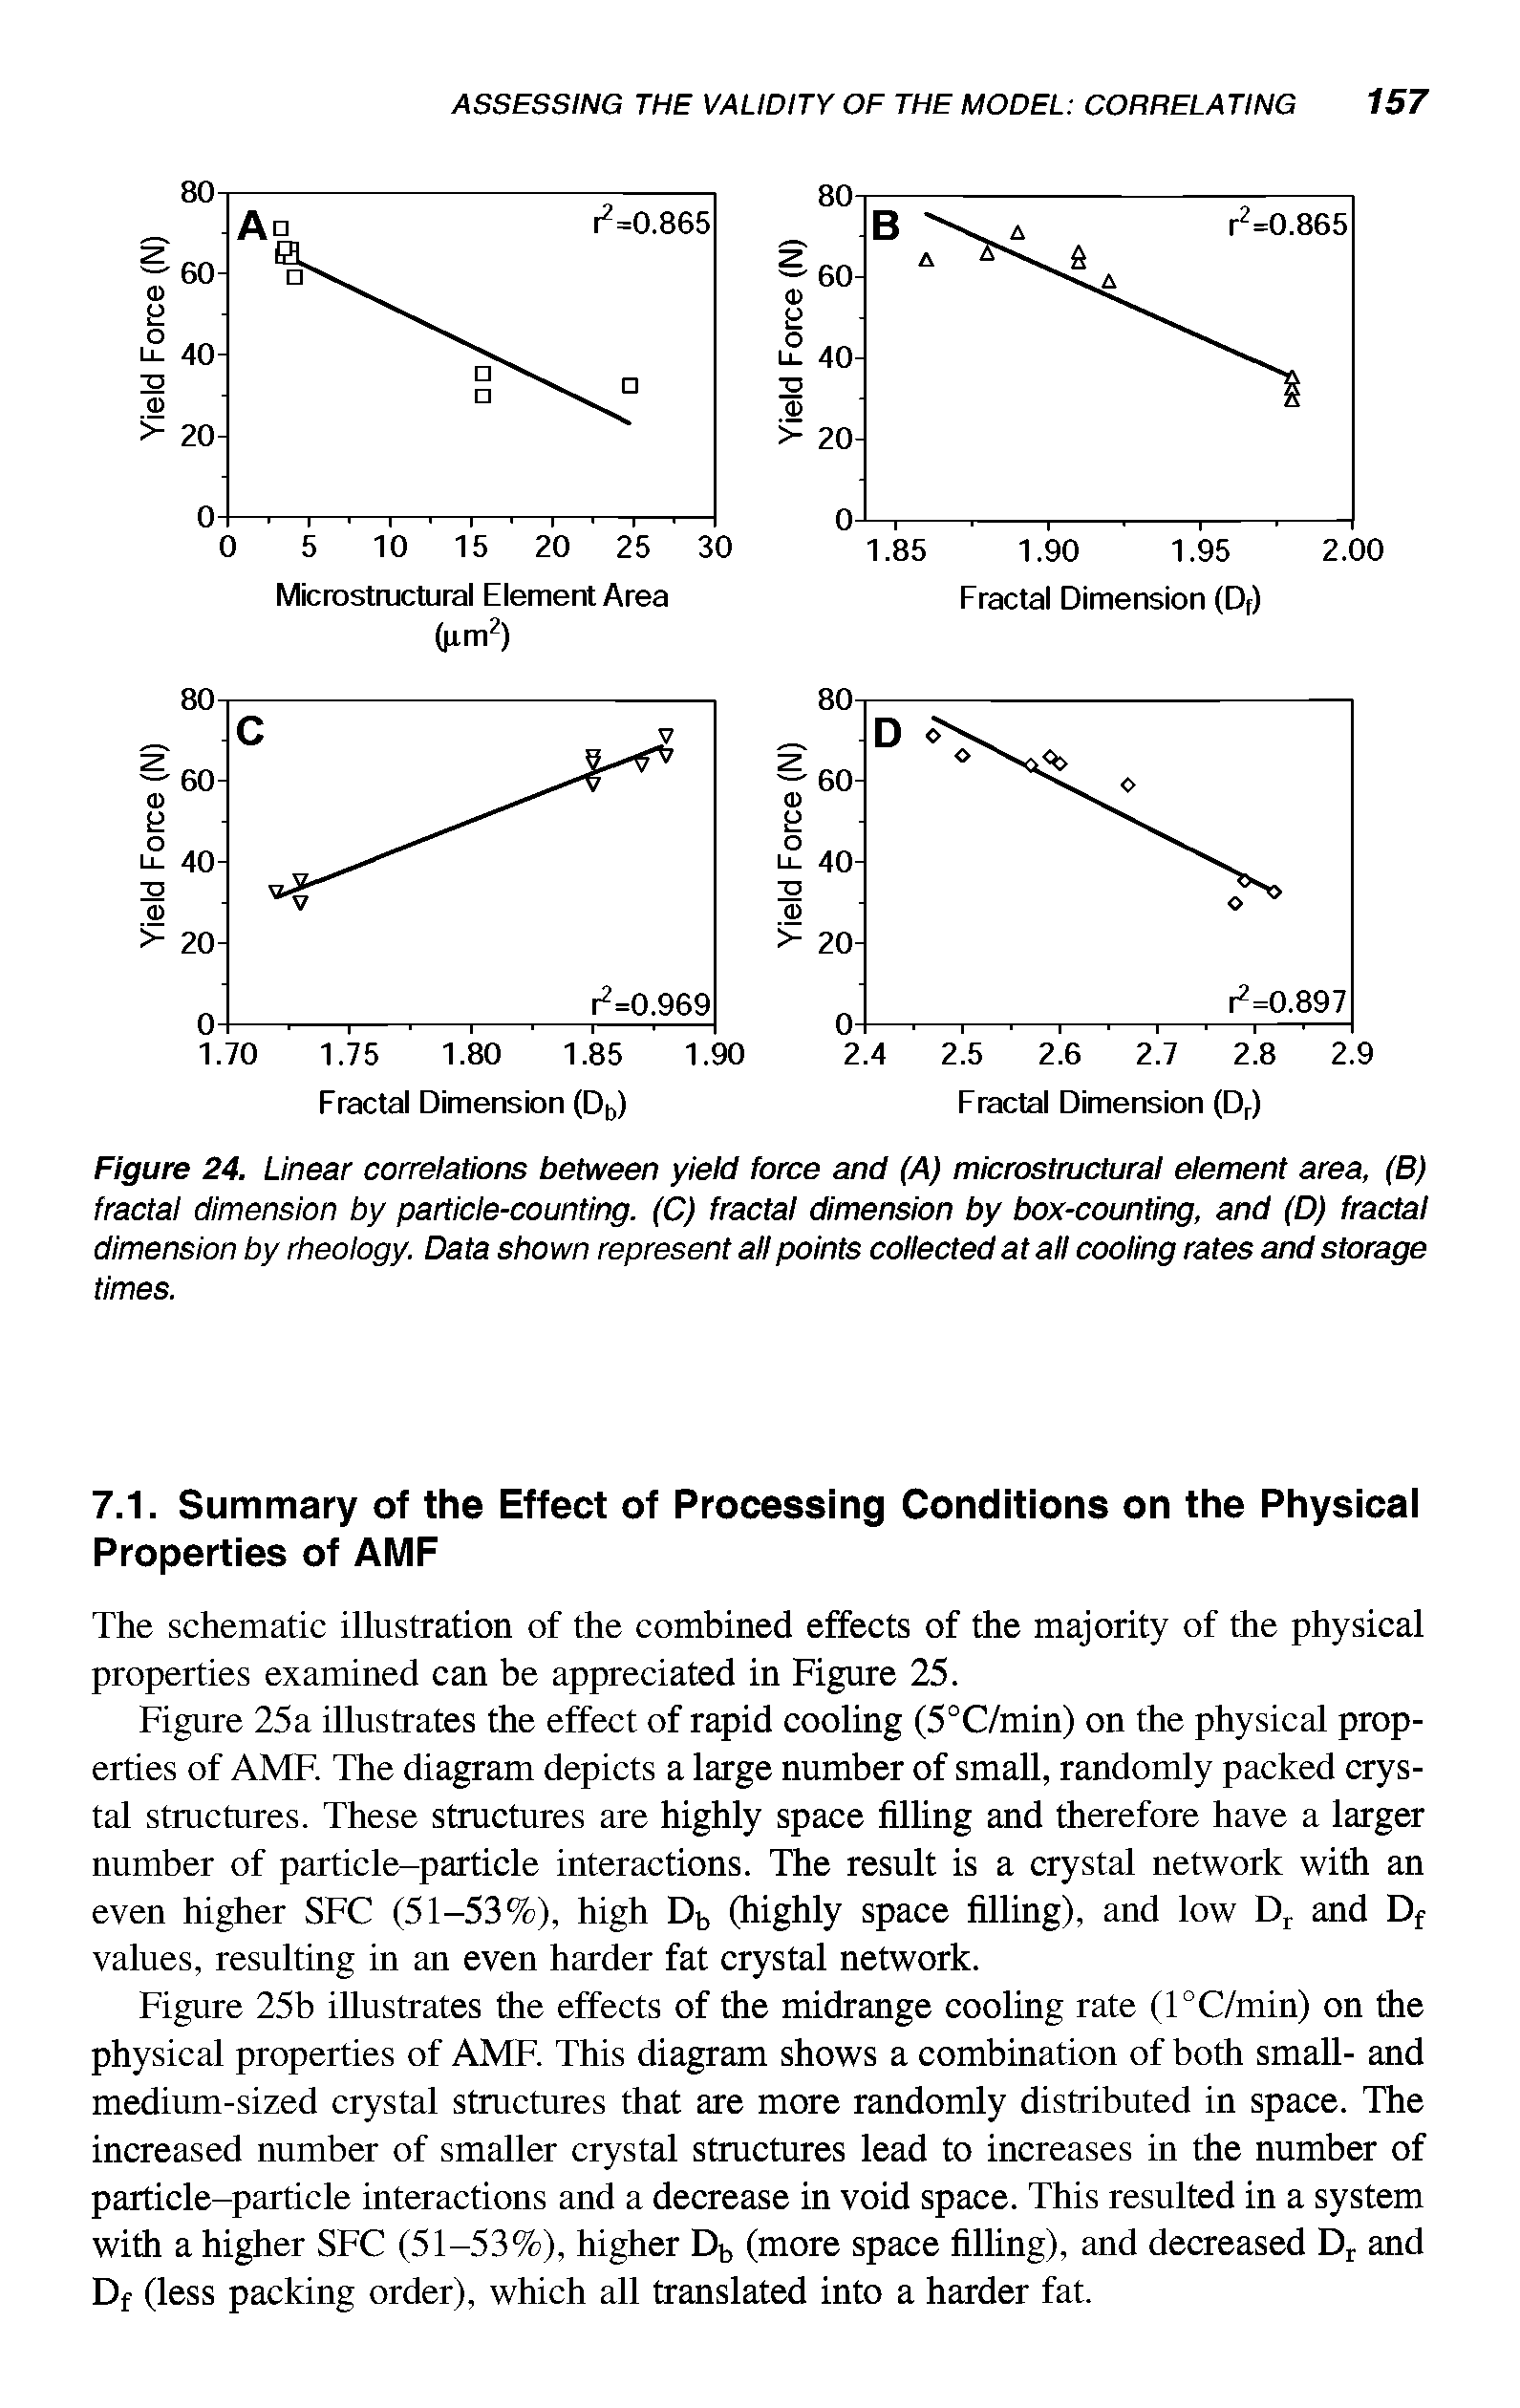 Figure 24. Linear correlations between yield force and (A) microstructural element area, (B) fractal dimension by particle-counting. (C) fractal dimension by box-counting, and (D) fractal dimension by rheology. Data shown represent all points collected at all cooling rates and storage times.